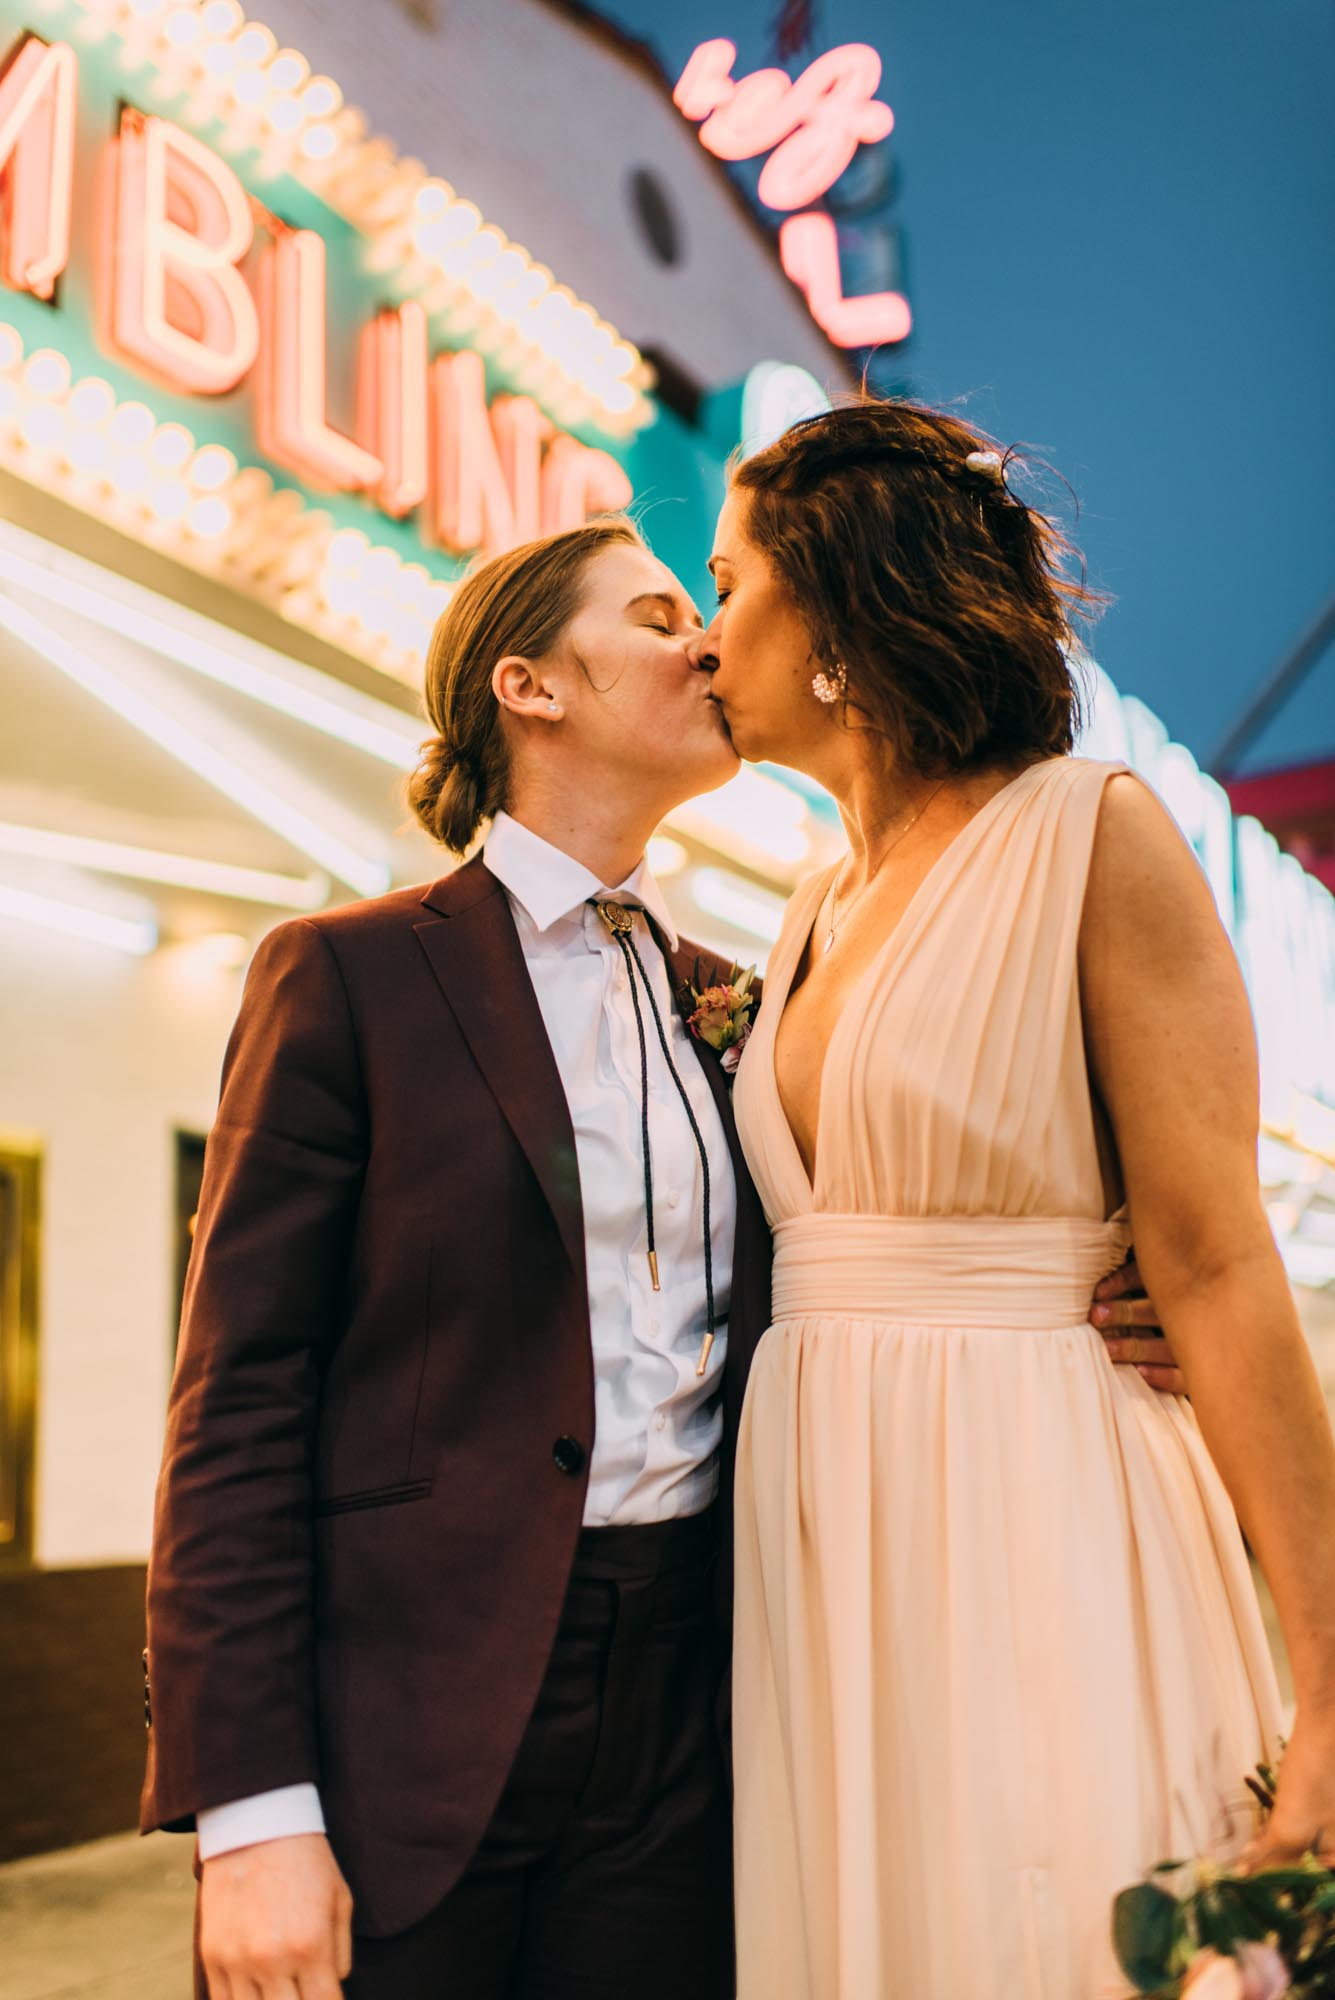 Las Vegas drive-thru elopement in chic vintage car | Ashley Marie Myers | Featured on Equally Wed, the leading LGBTQ+ wedding magazine